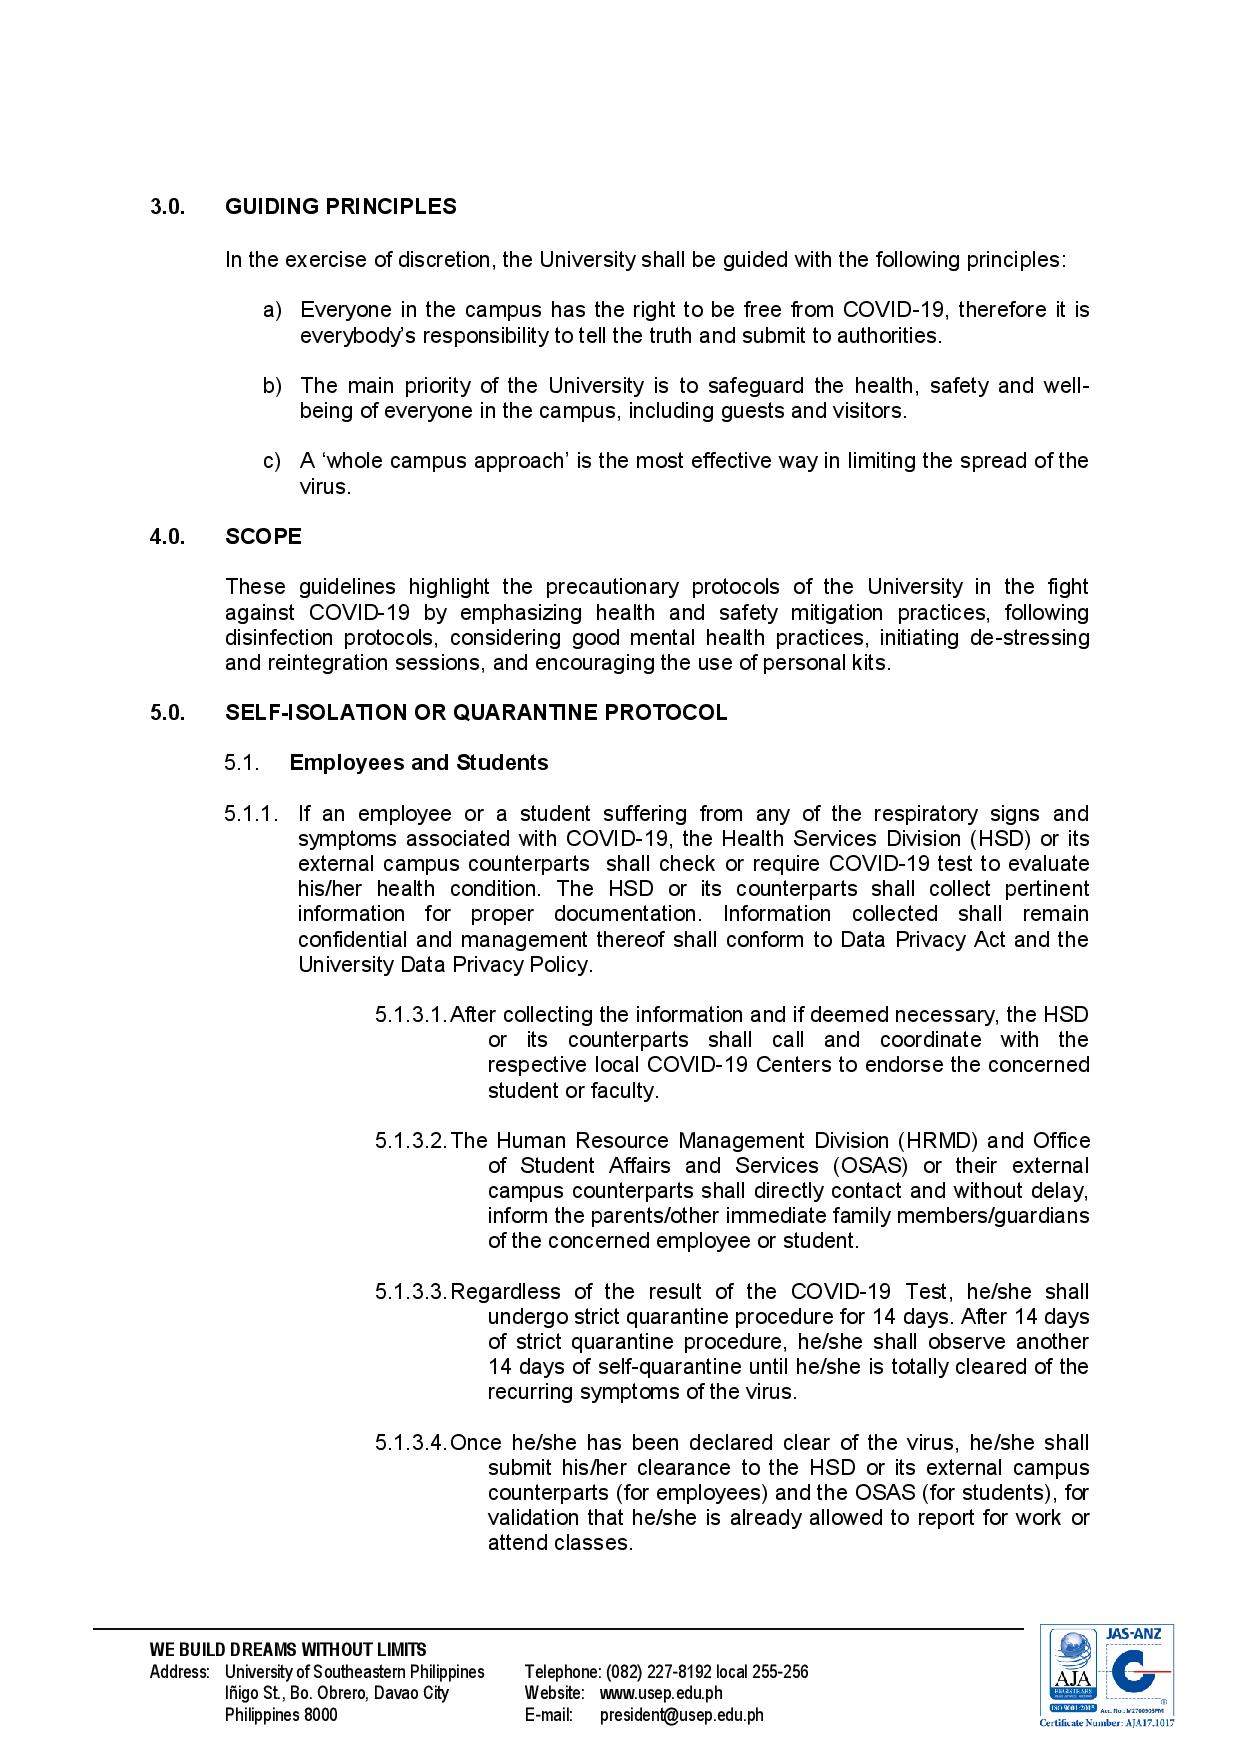 mc-03-s-2020-memorandum-circular-on-administrative-guidelines-upon-resumption-of-work-and-conduct-of-classes-under-the-new-normal-condition-1-page-002